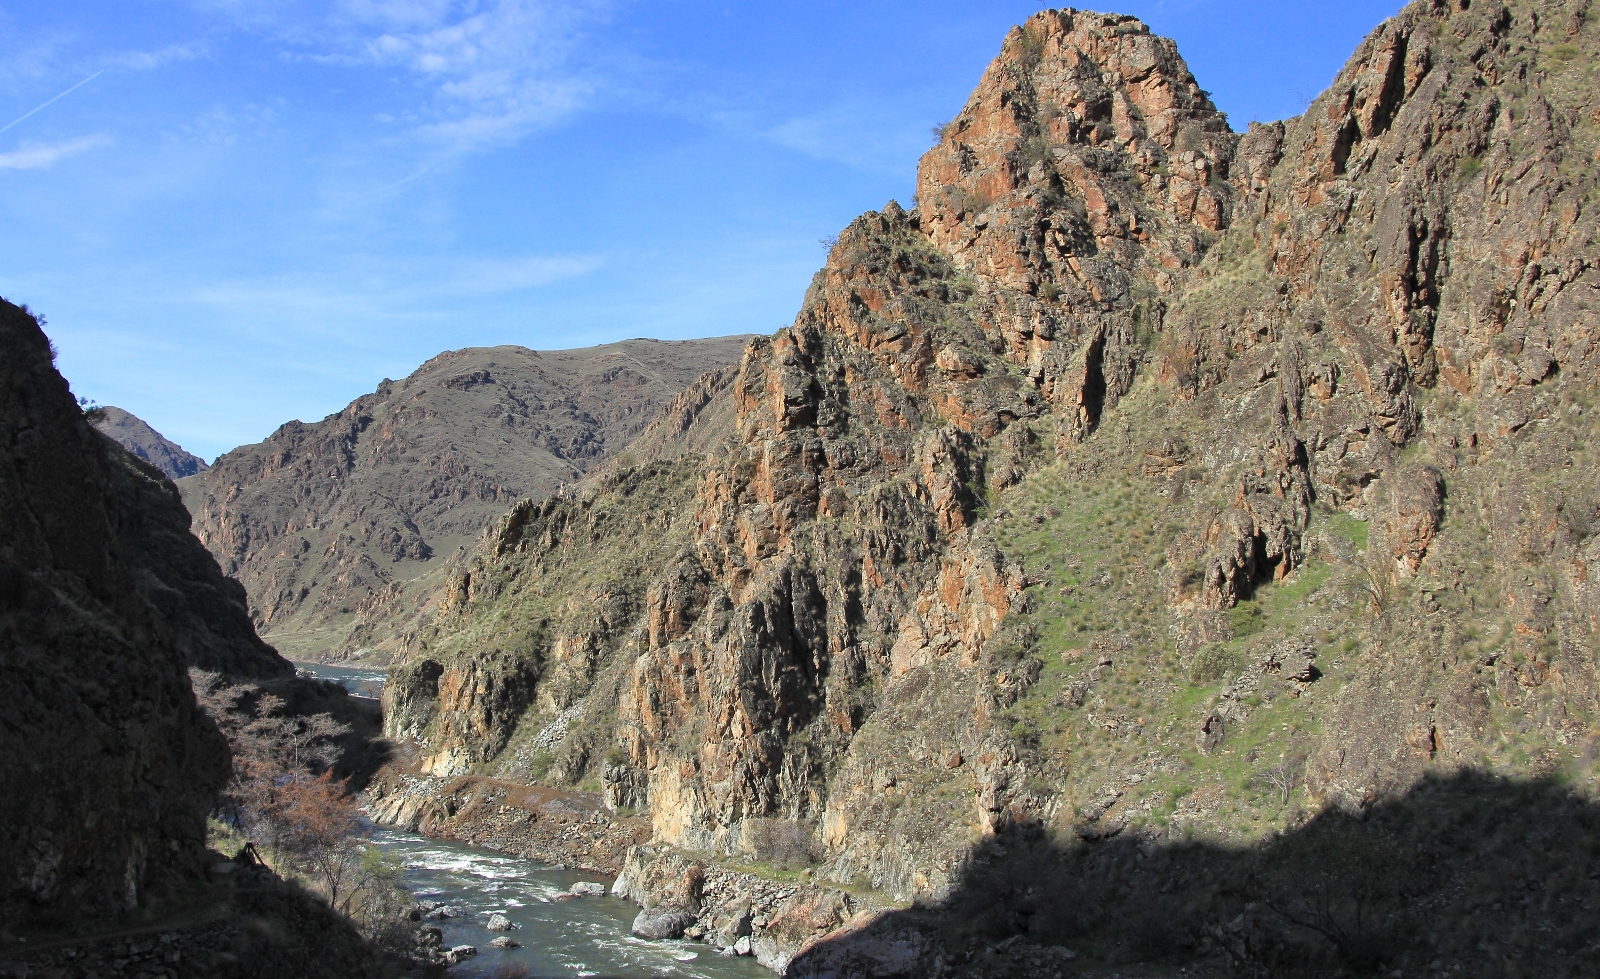 first glimpse of Hells Canyon and the Snake River